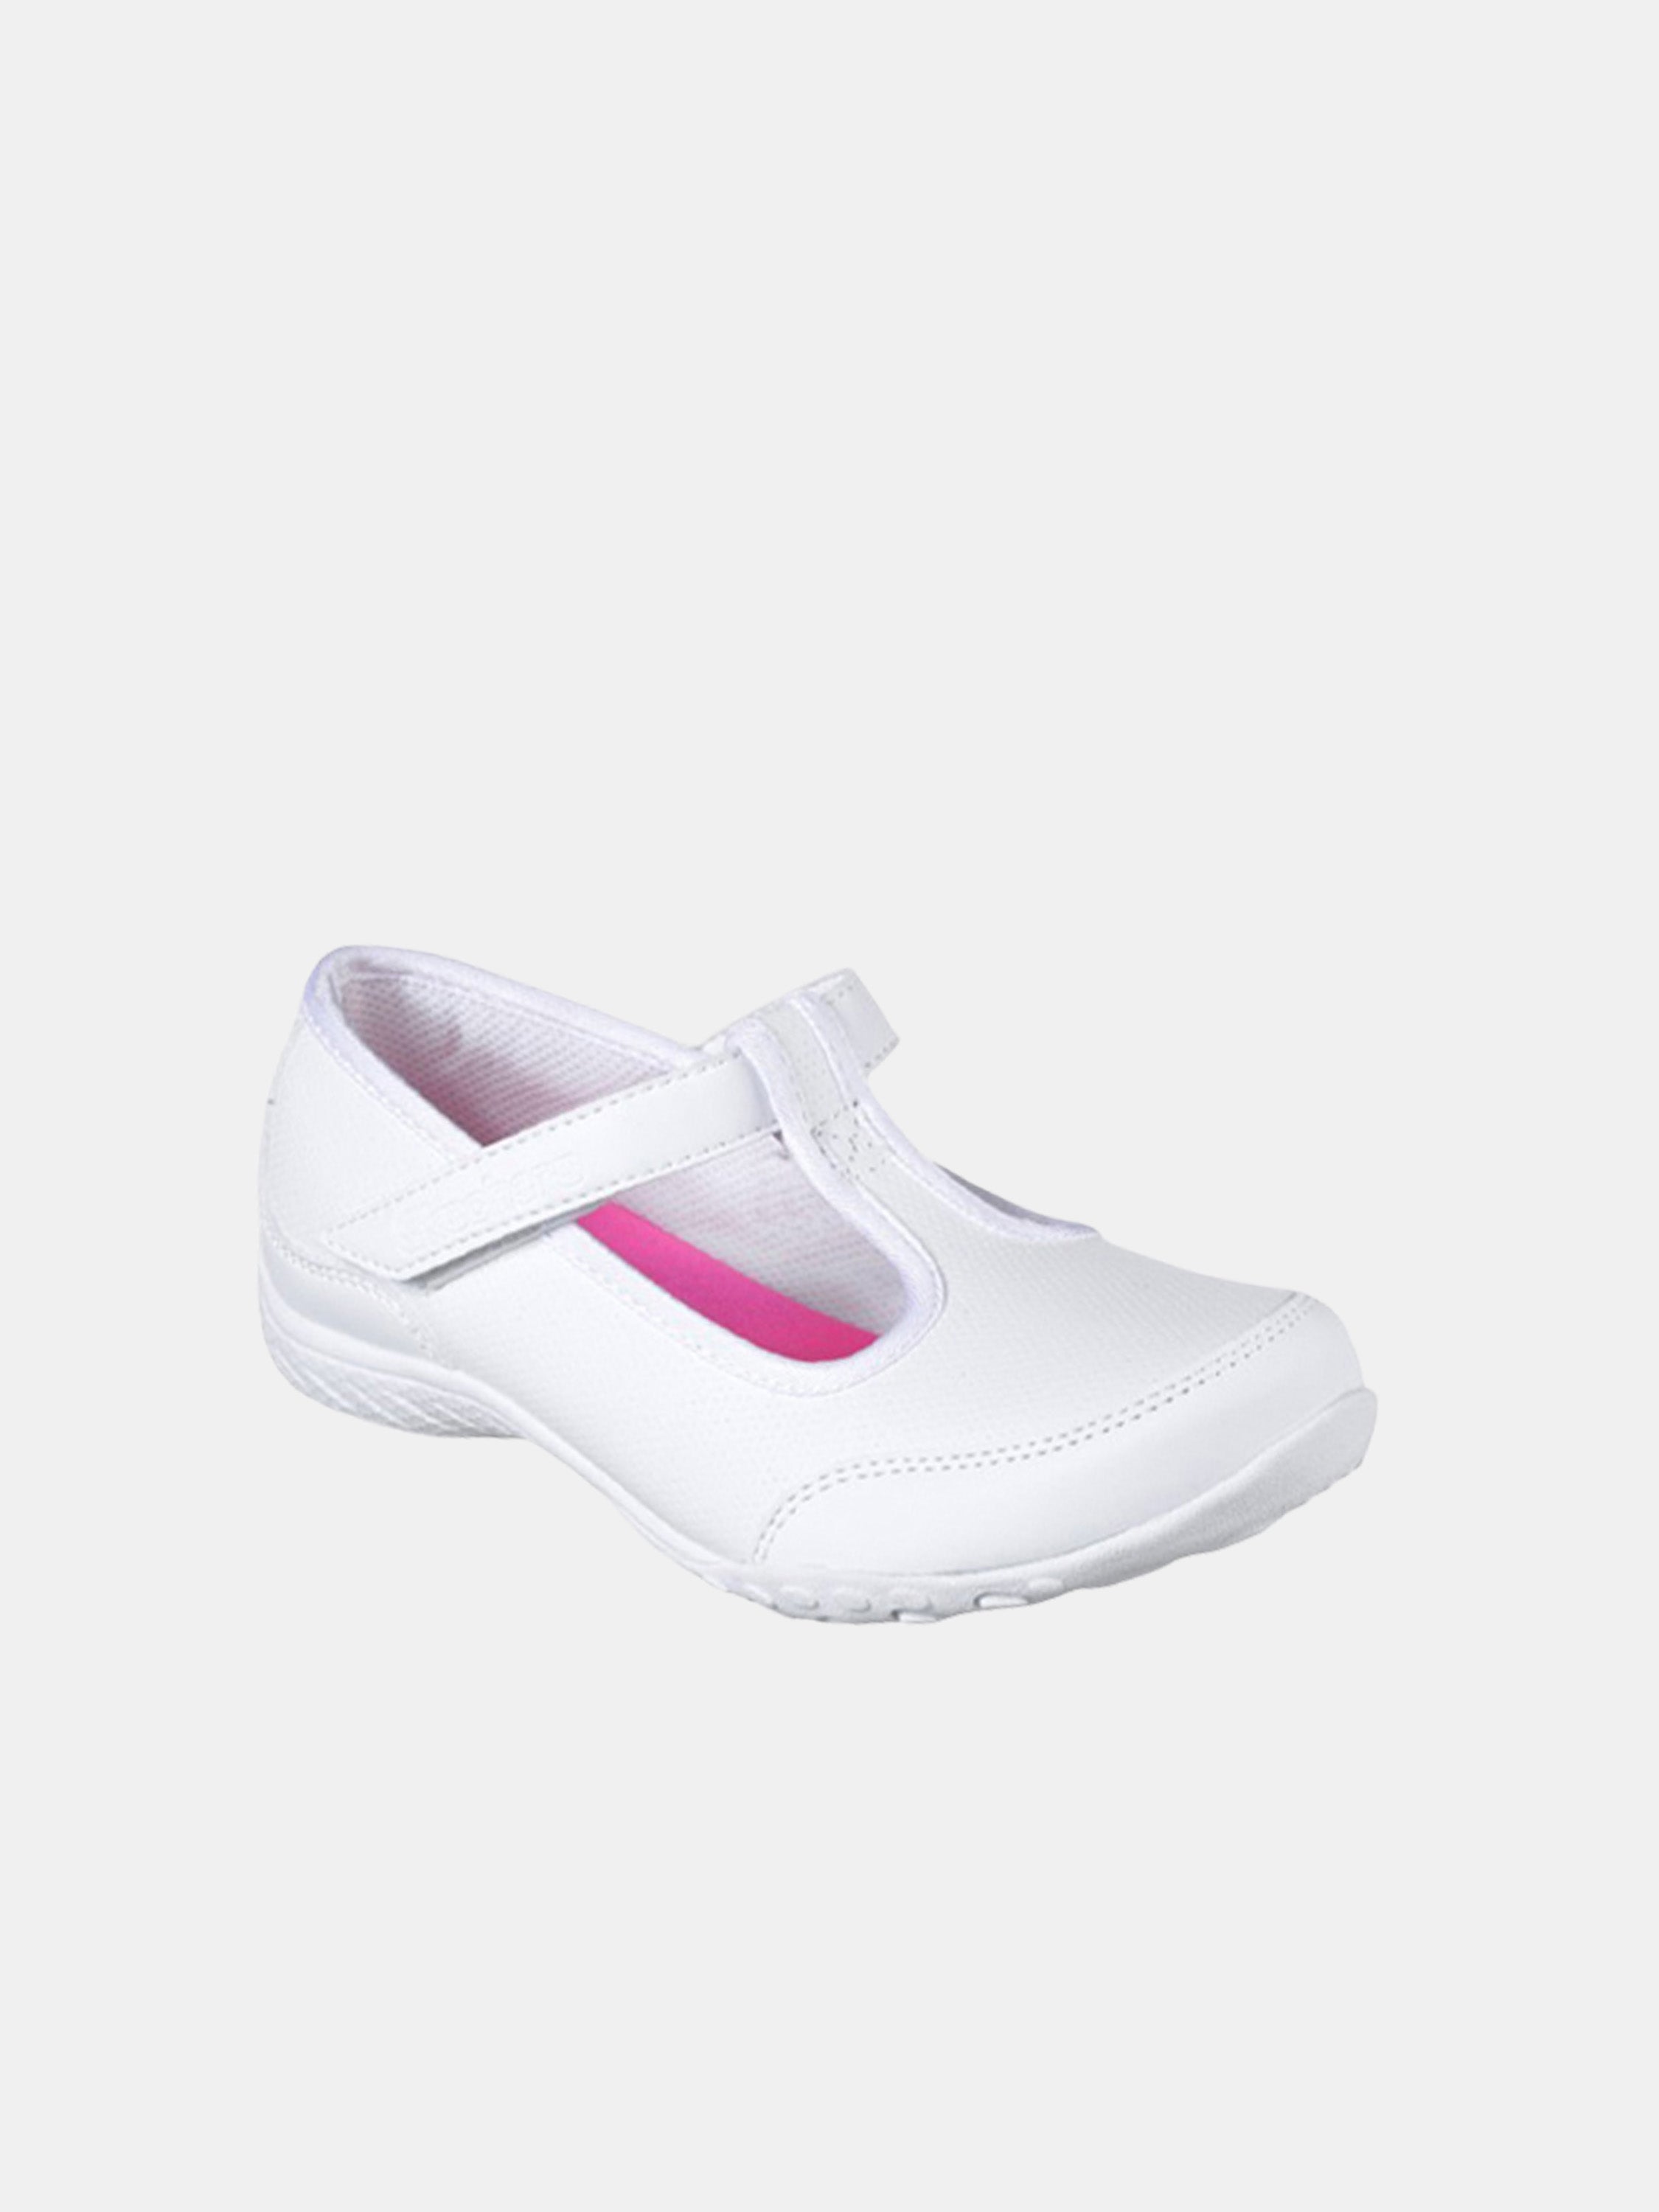 Skechers Relaxed Fit: Breathe Easy - Playground Princess #color_White